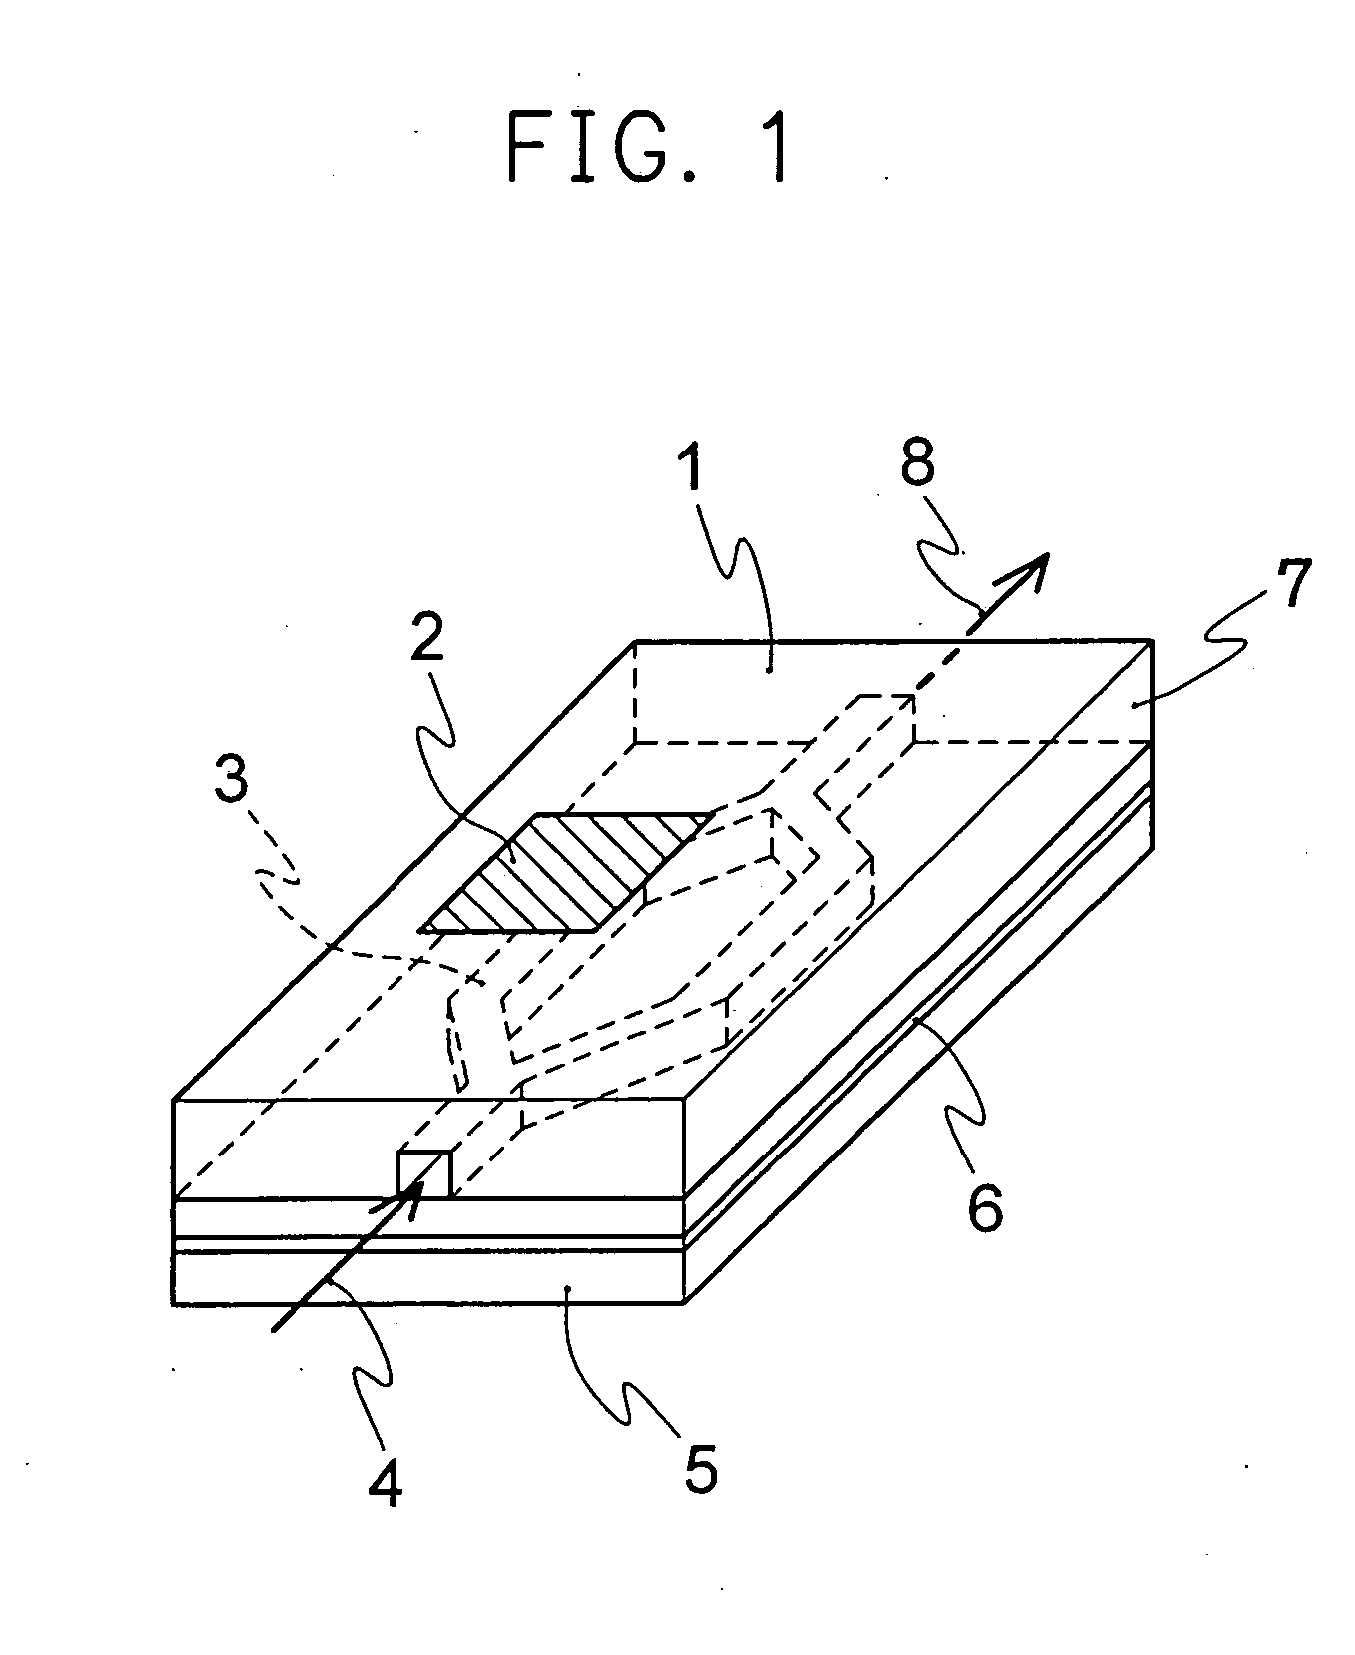 Nonlinear optical materials comprising fluorine-containing polymer